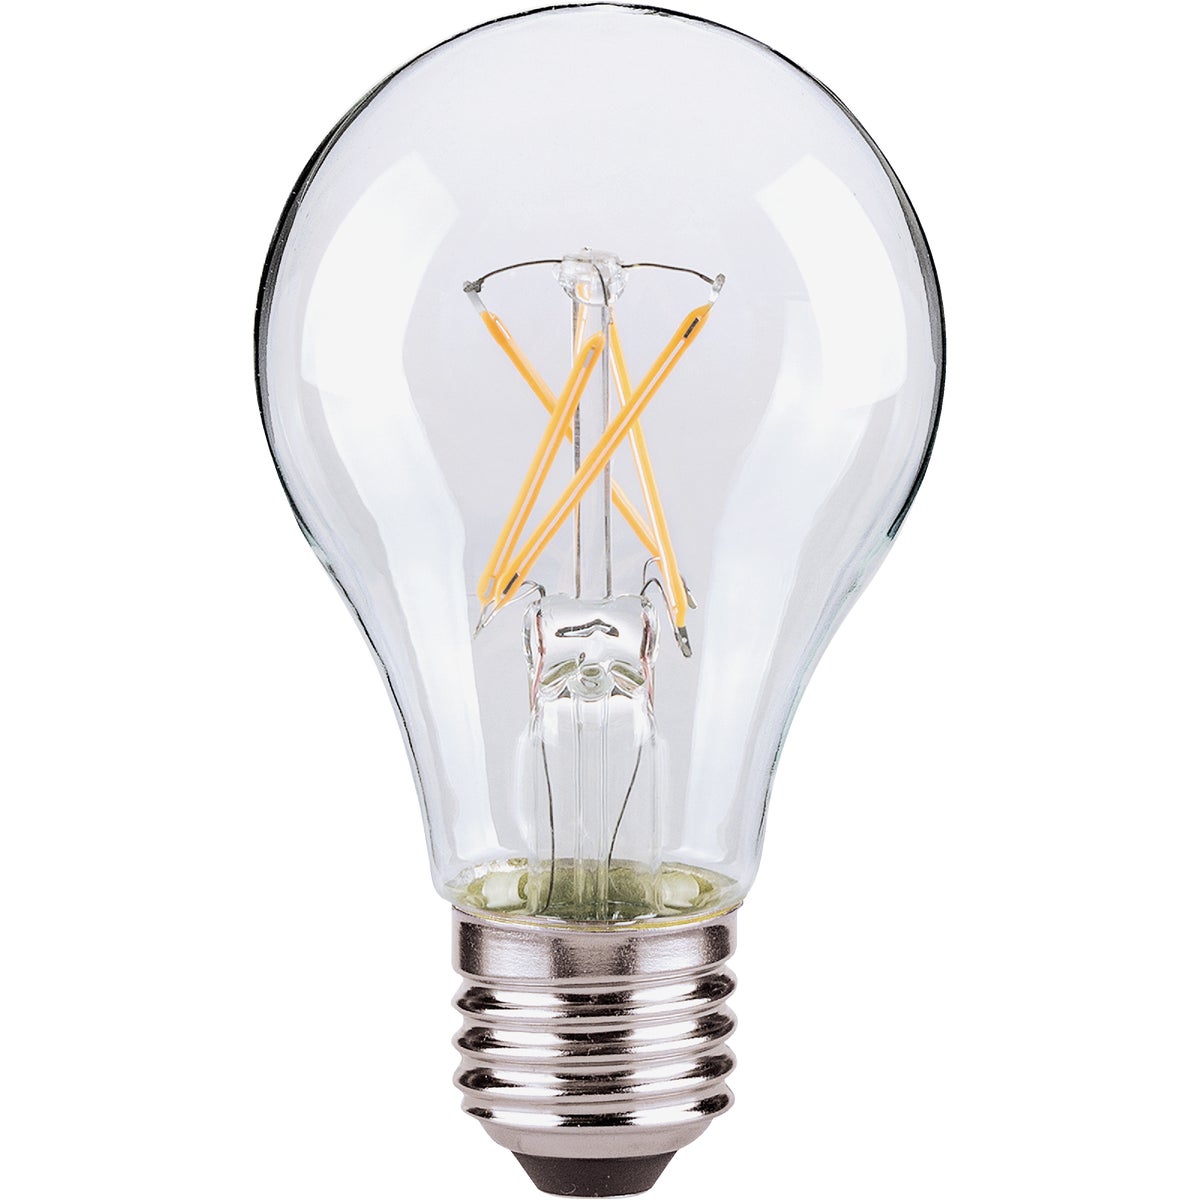 Item 501918, A19 LED (light emitting diode) light bulb with a traditional incandescent 